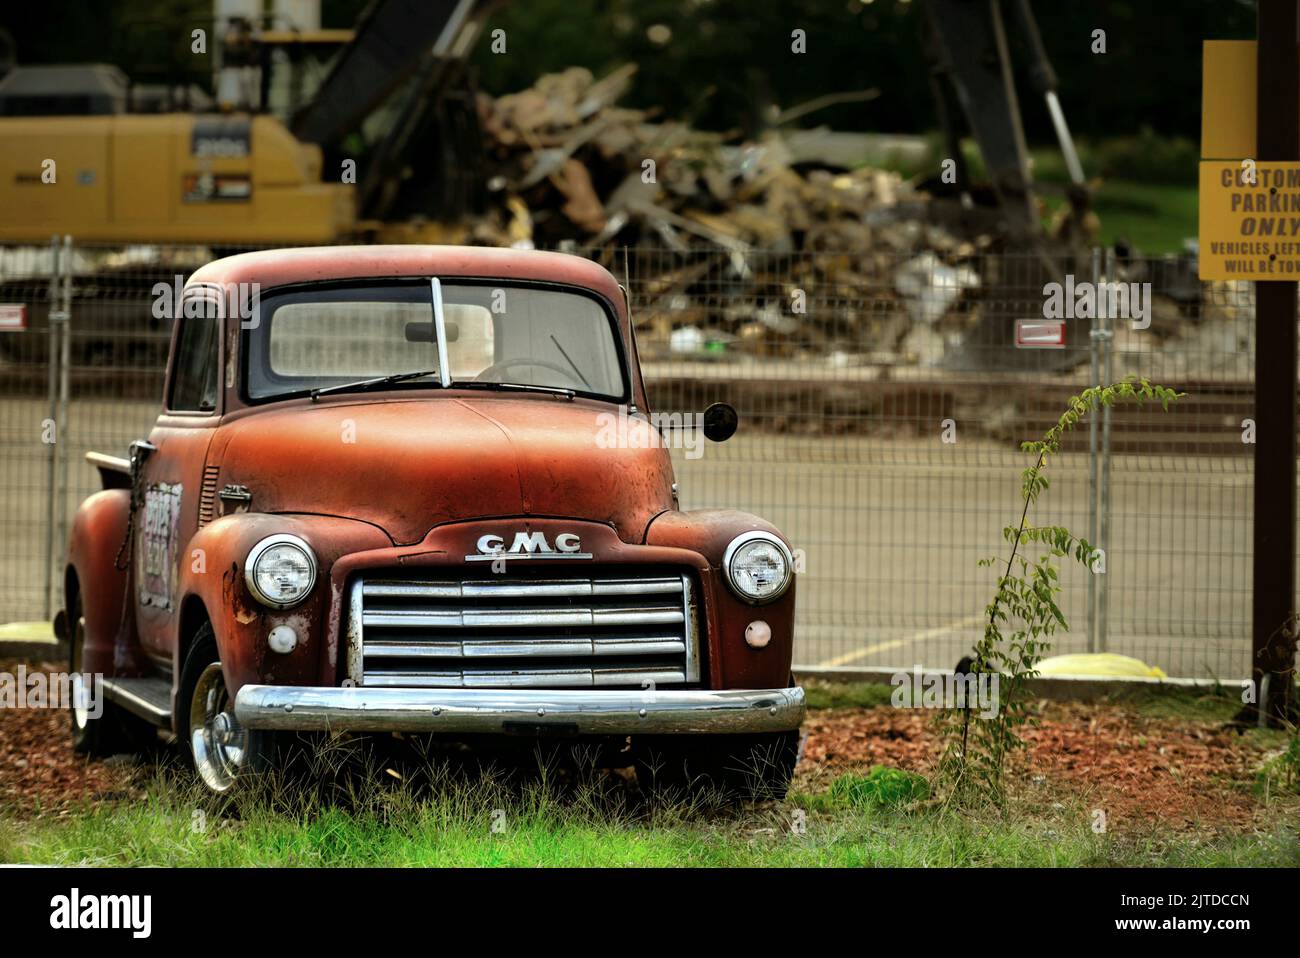 Old abandoned vintage truck Stock Photo